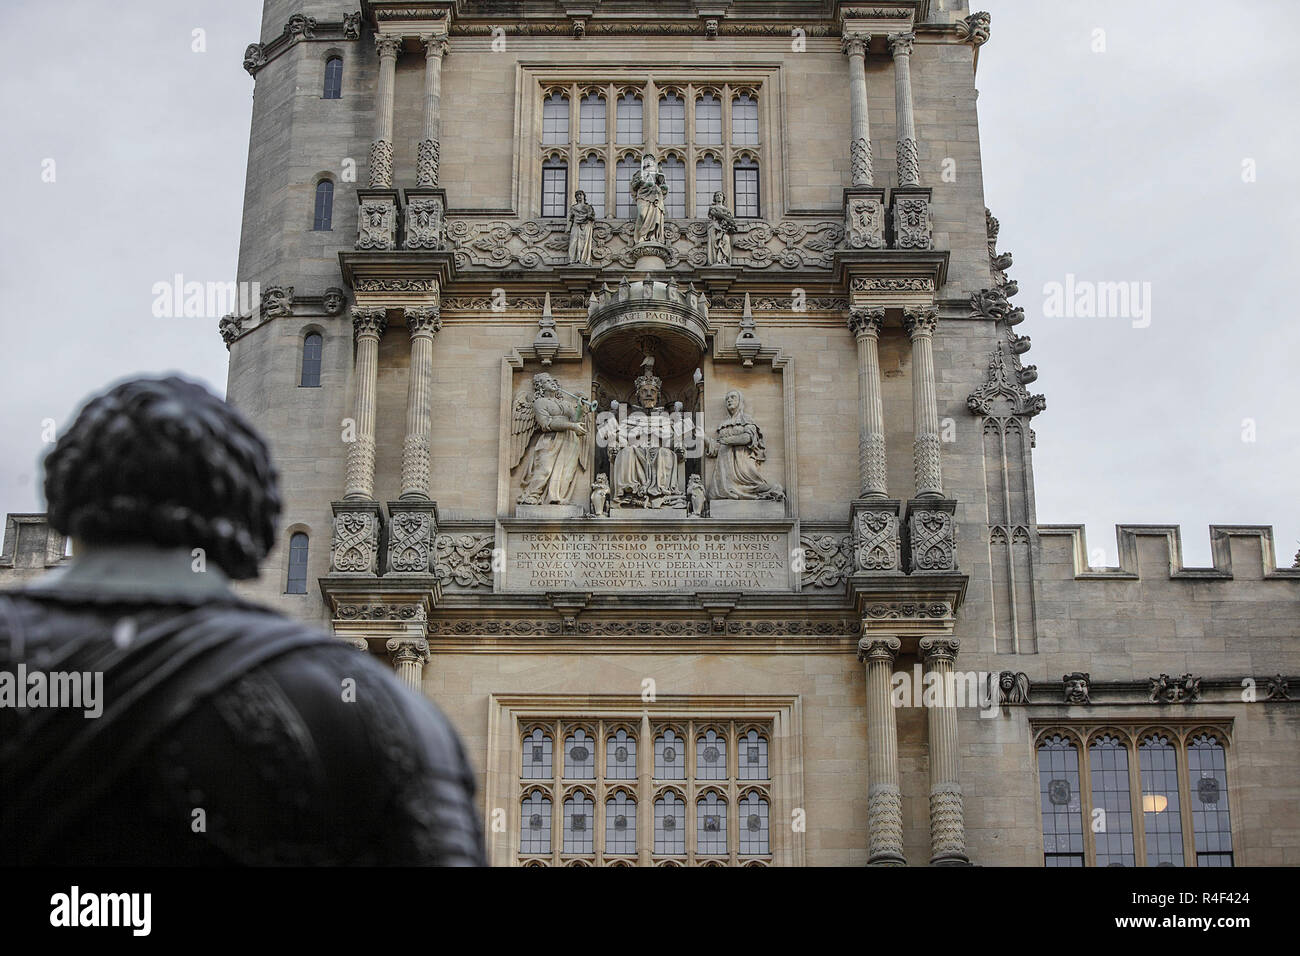 Architectural features within the internal confines in the courtyard of the Old Bodleian Library in the City of Oxford. Stock Photo